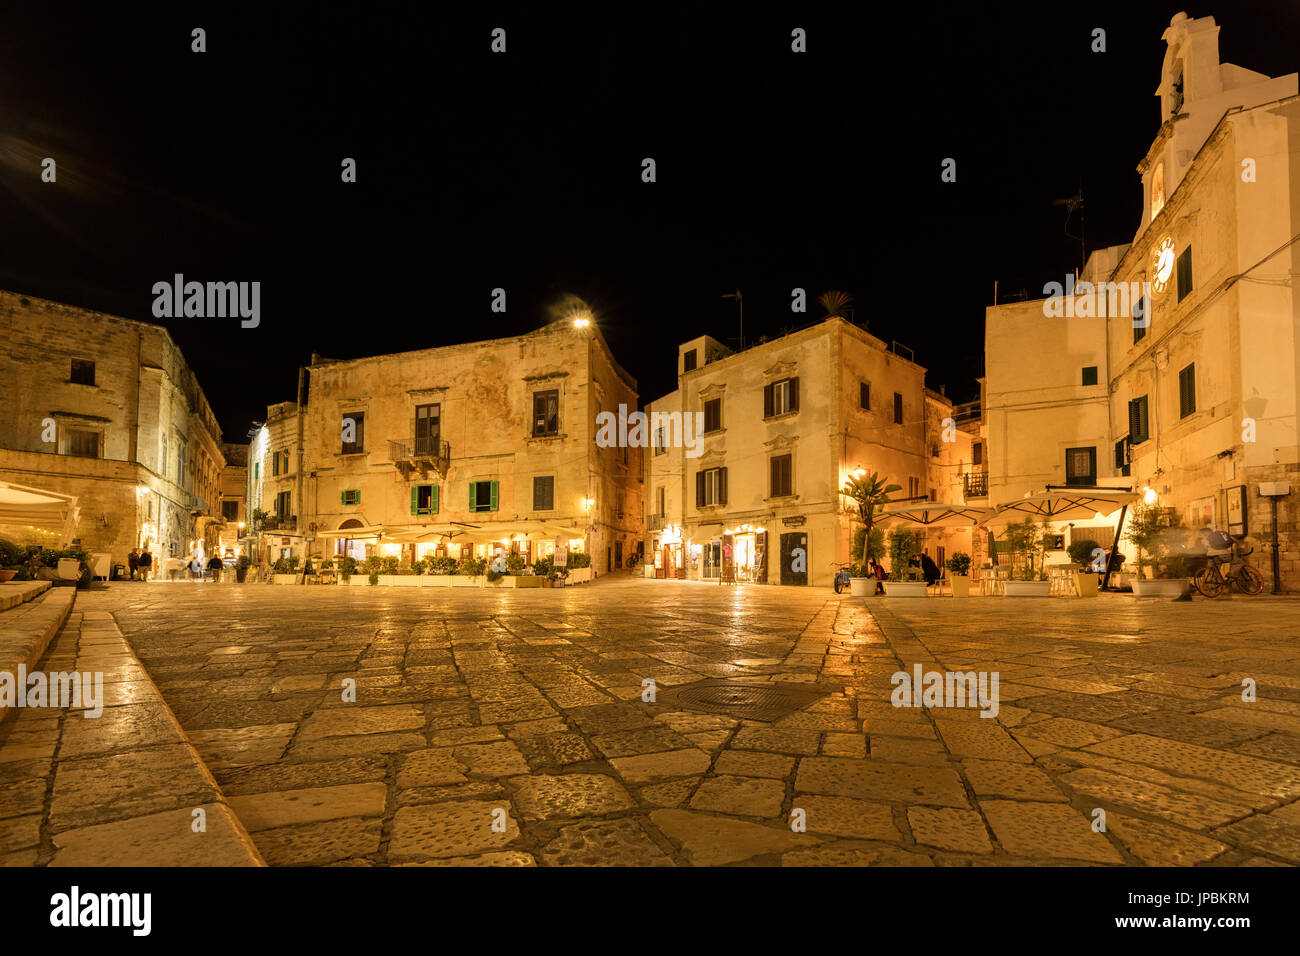 Night view of the historical buildings and squares of the old town Polignano a Mare province of Bari Apulia Italy Europe Stock Photo